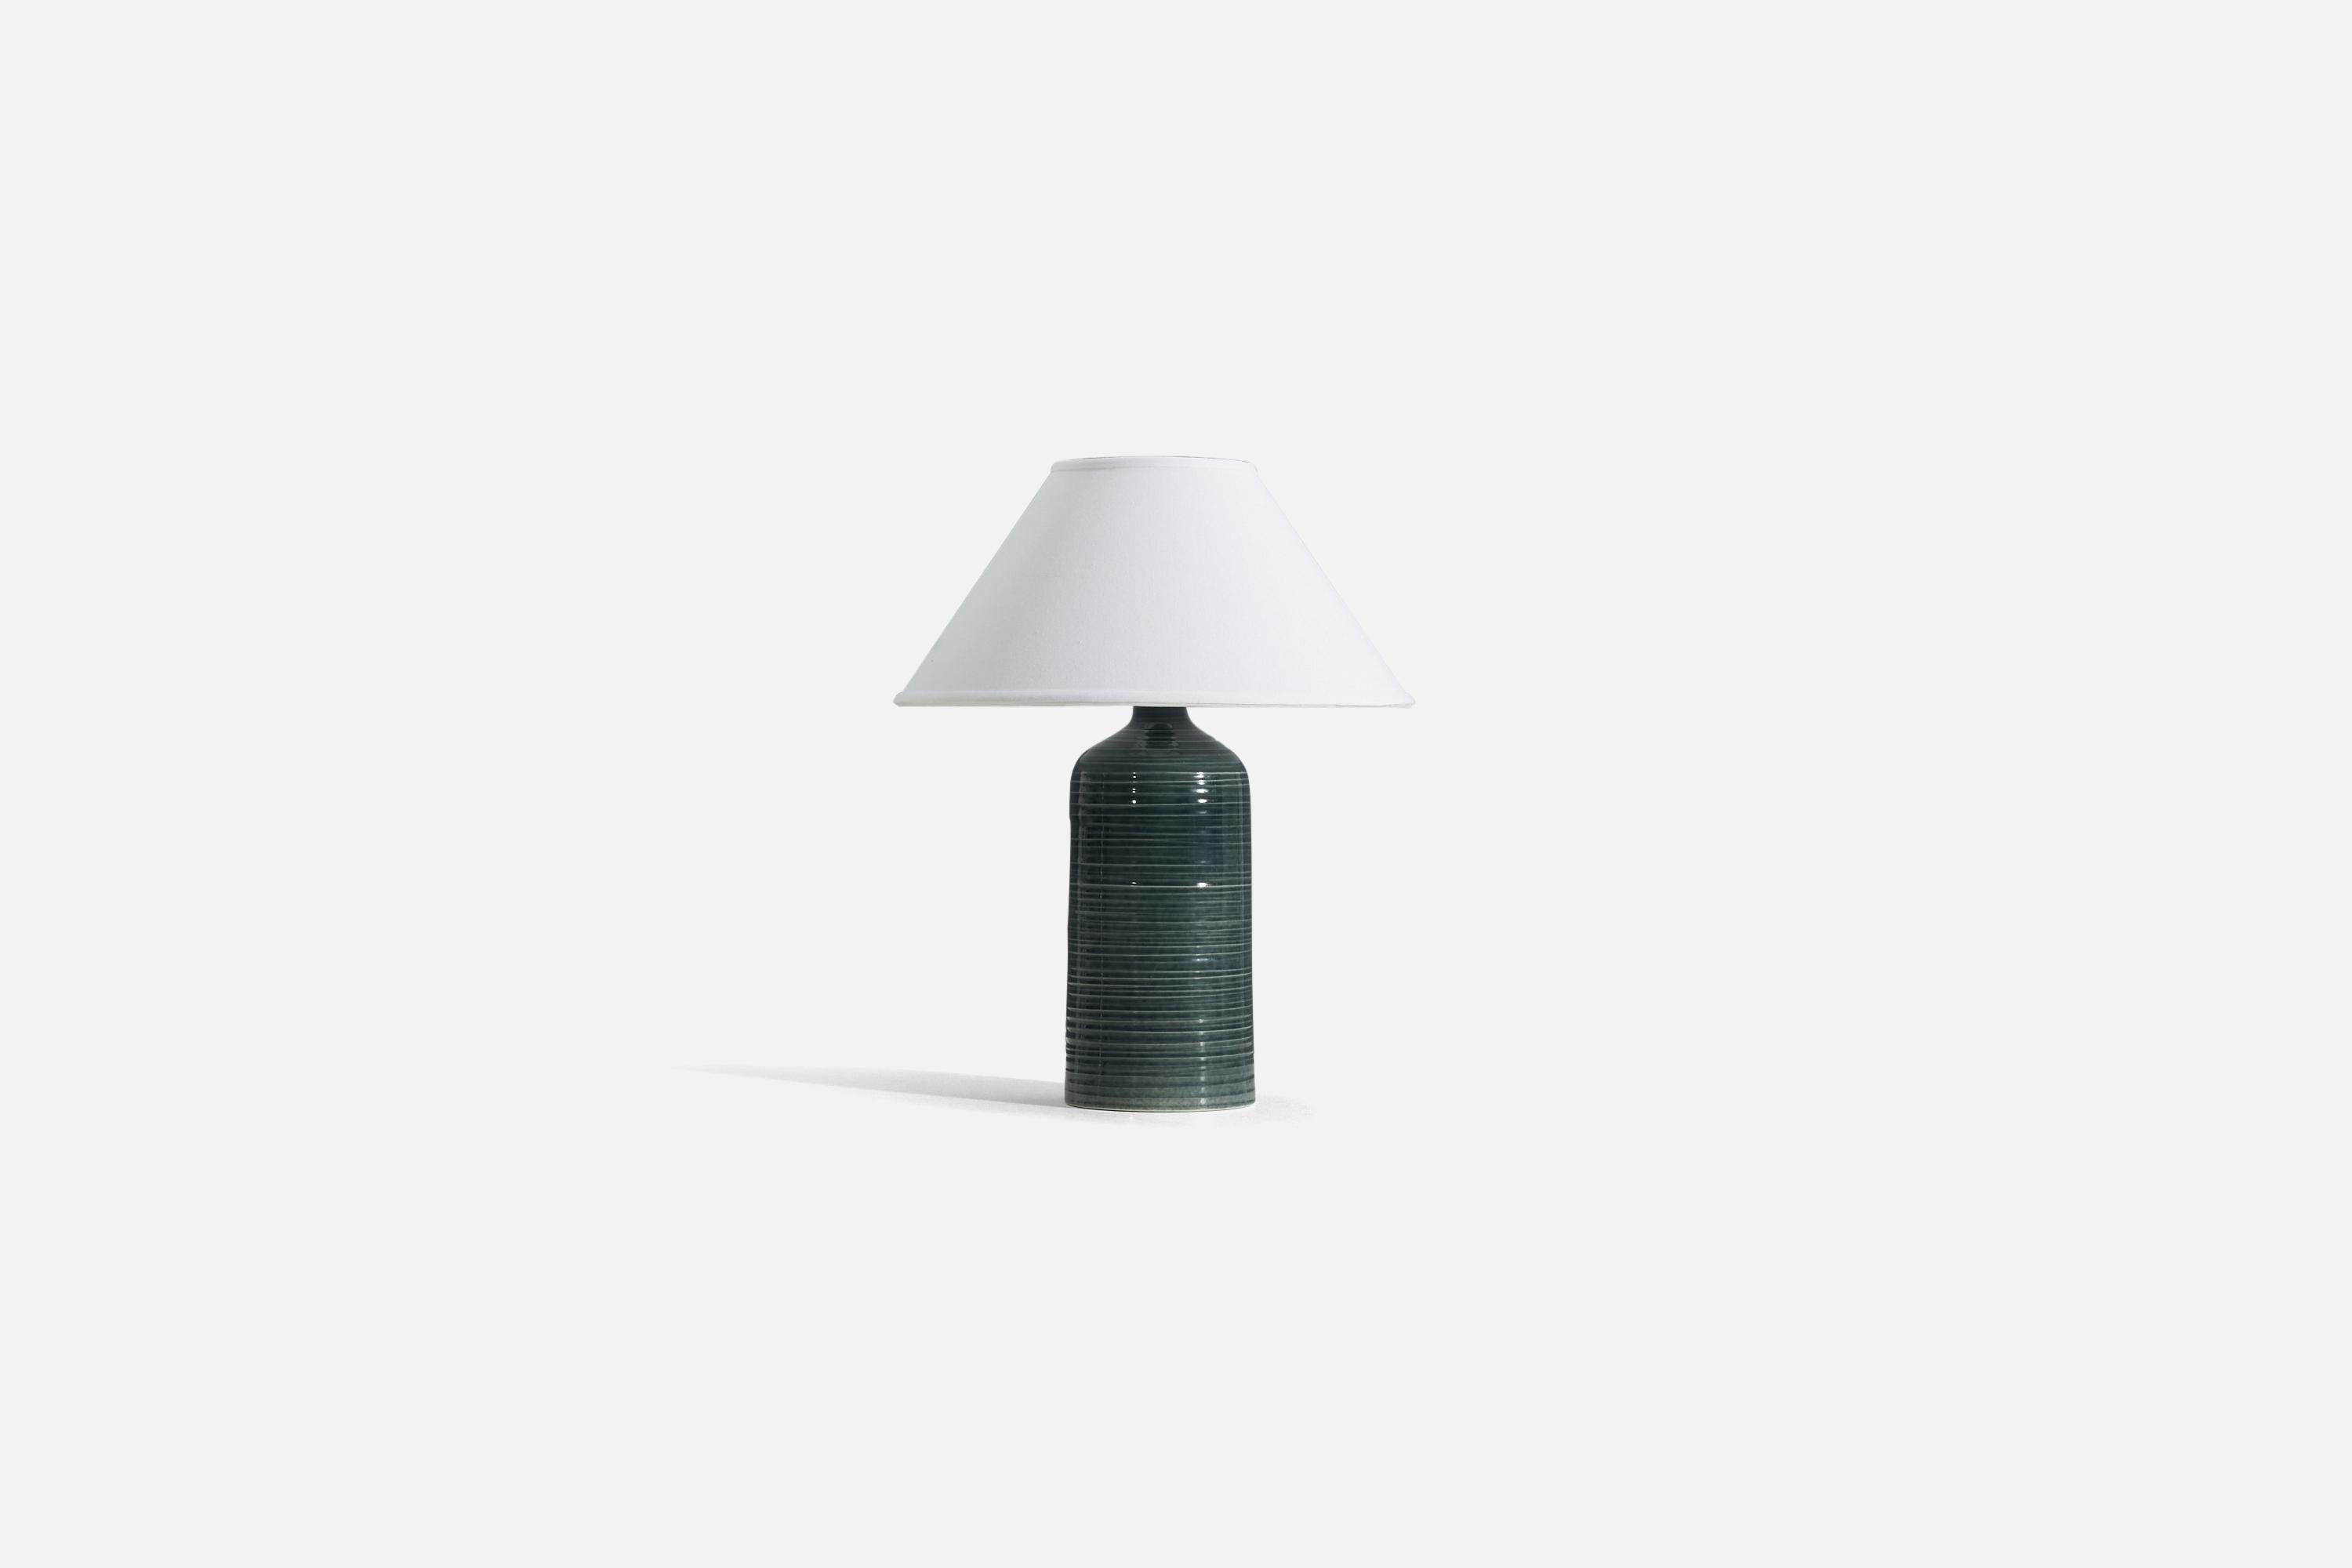 A green glazed and incised stoneware table lamp, produced by Arabia, Finland, c. 1950s.